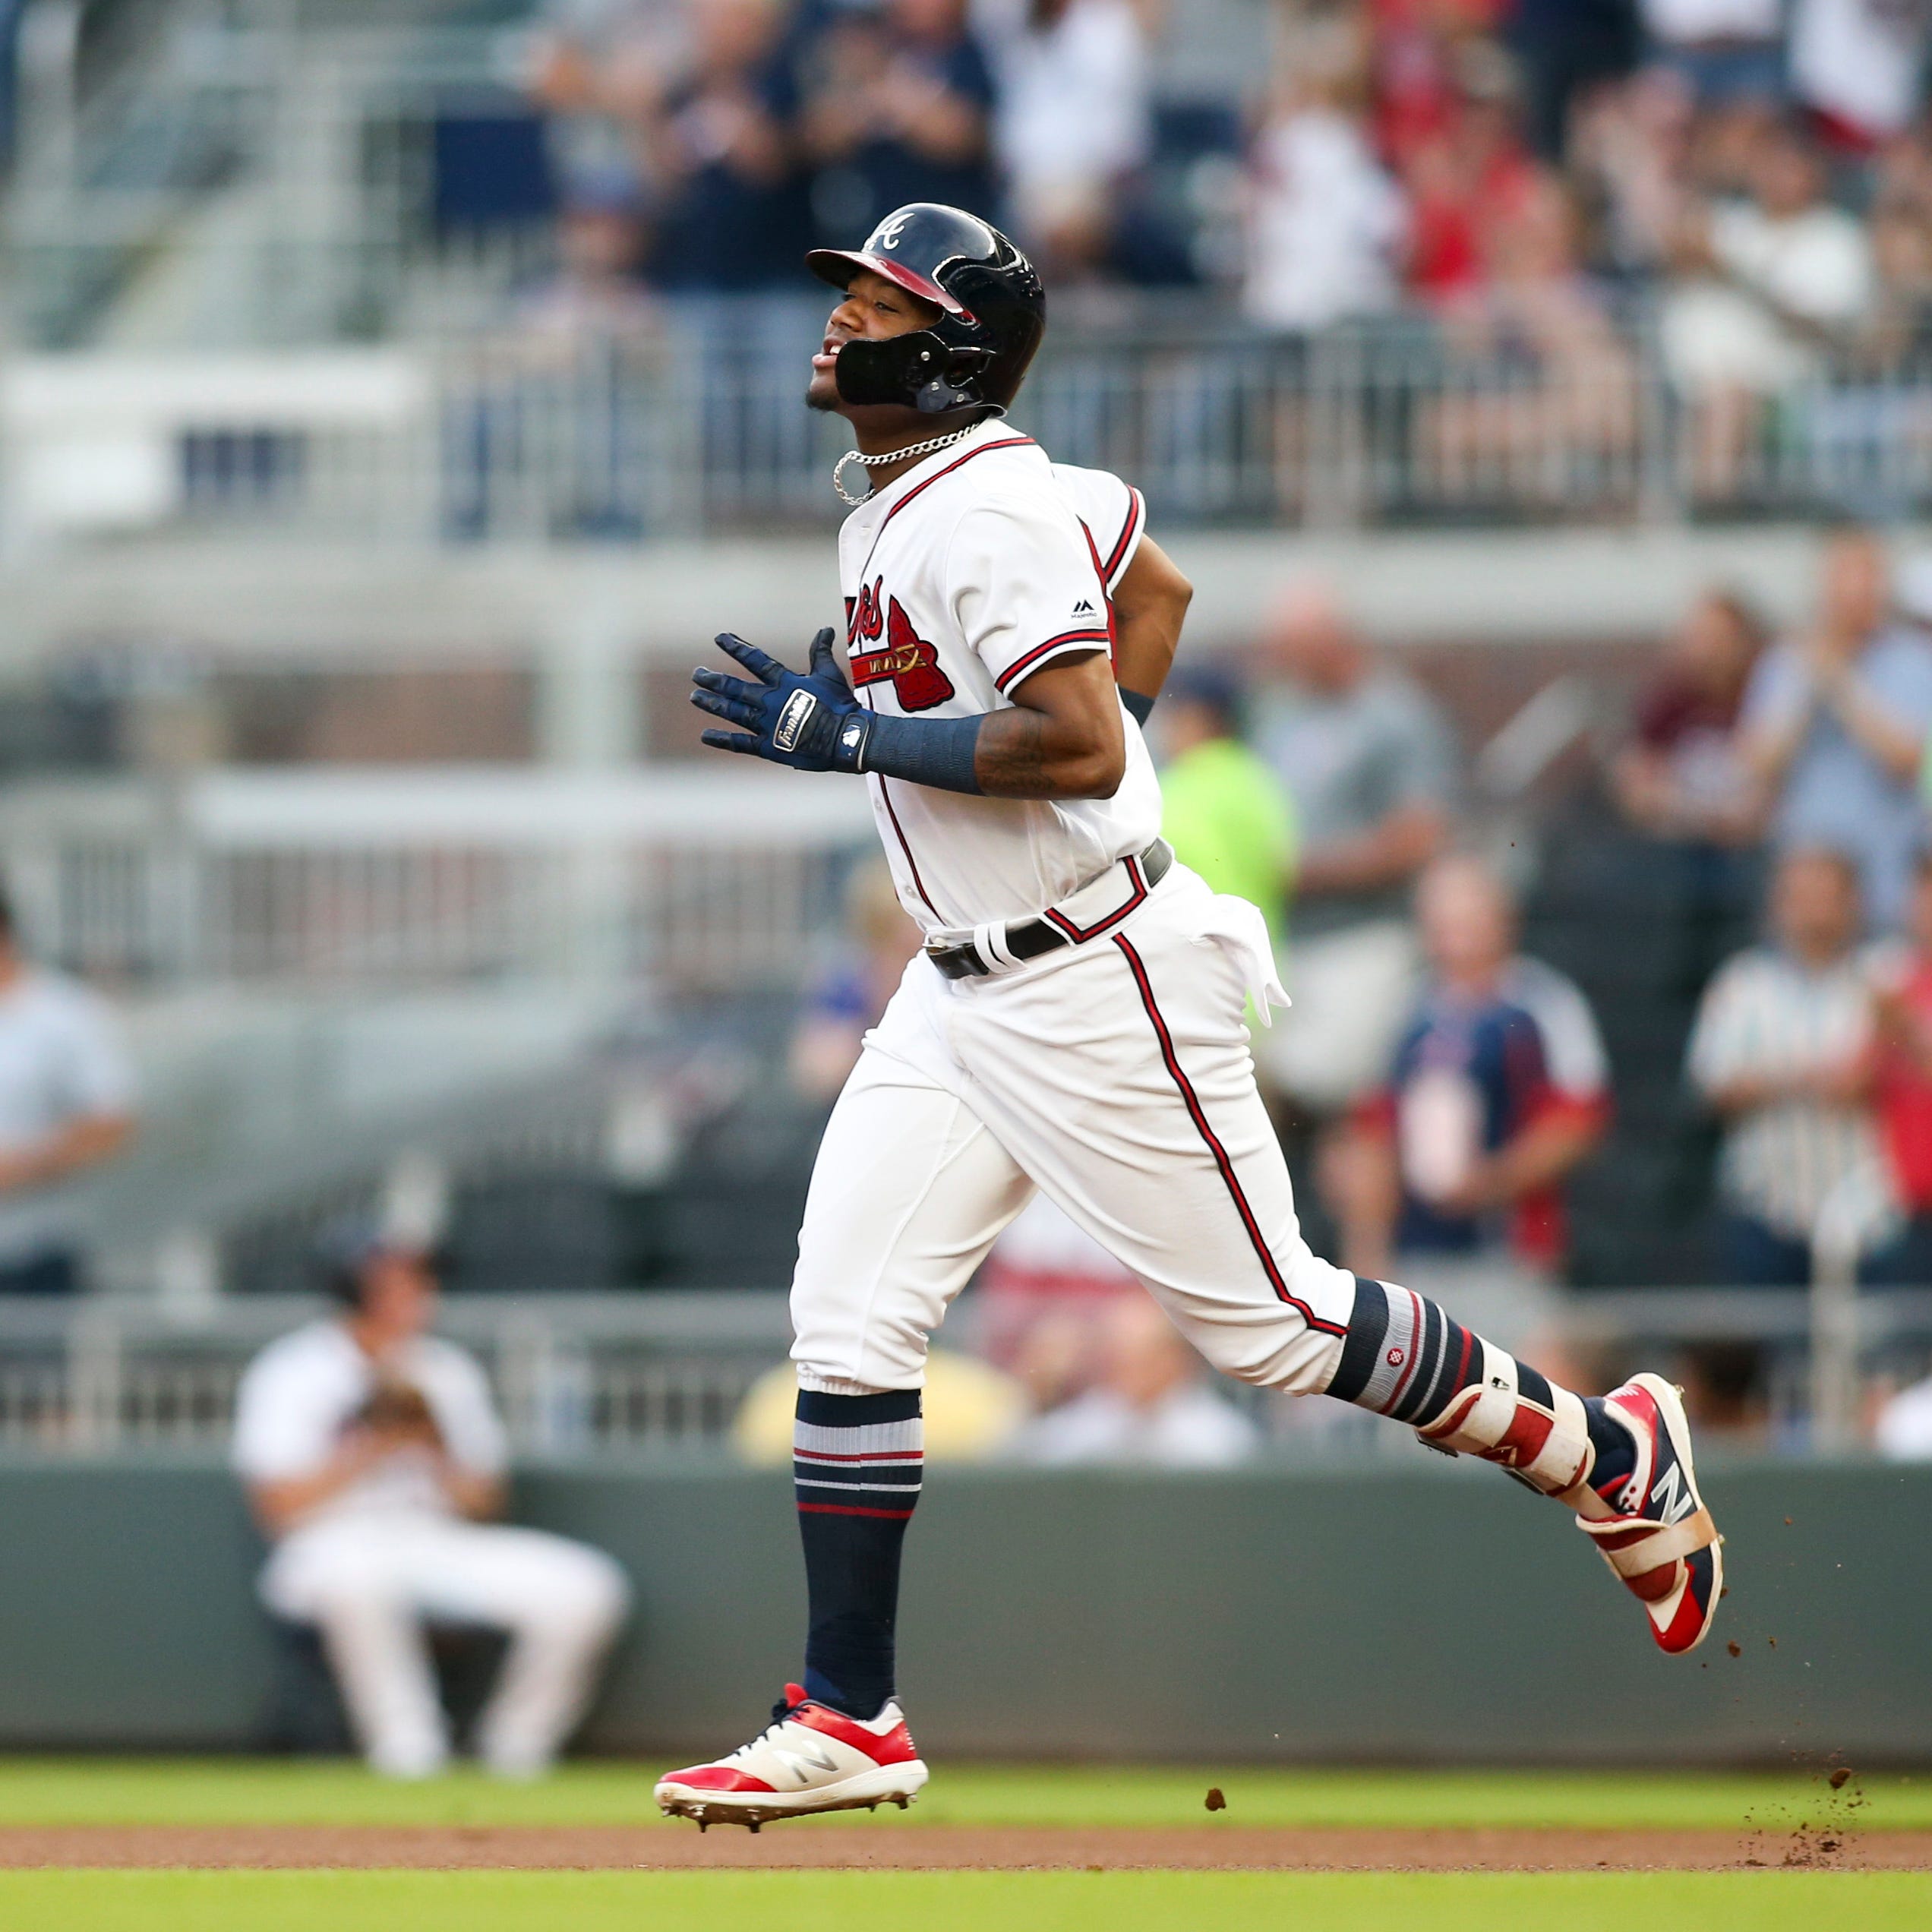 Braves outfielder Ronald Acuna Jr. circles the bases after hitting yet another leadoff home run.